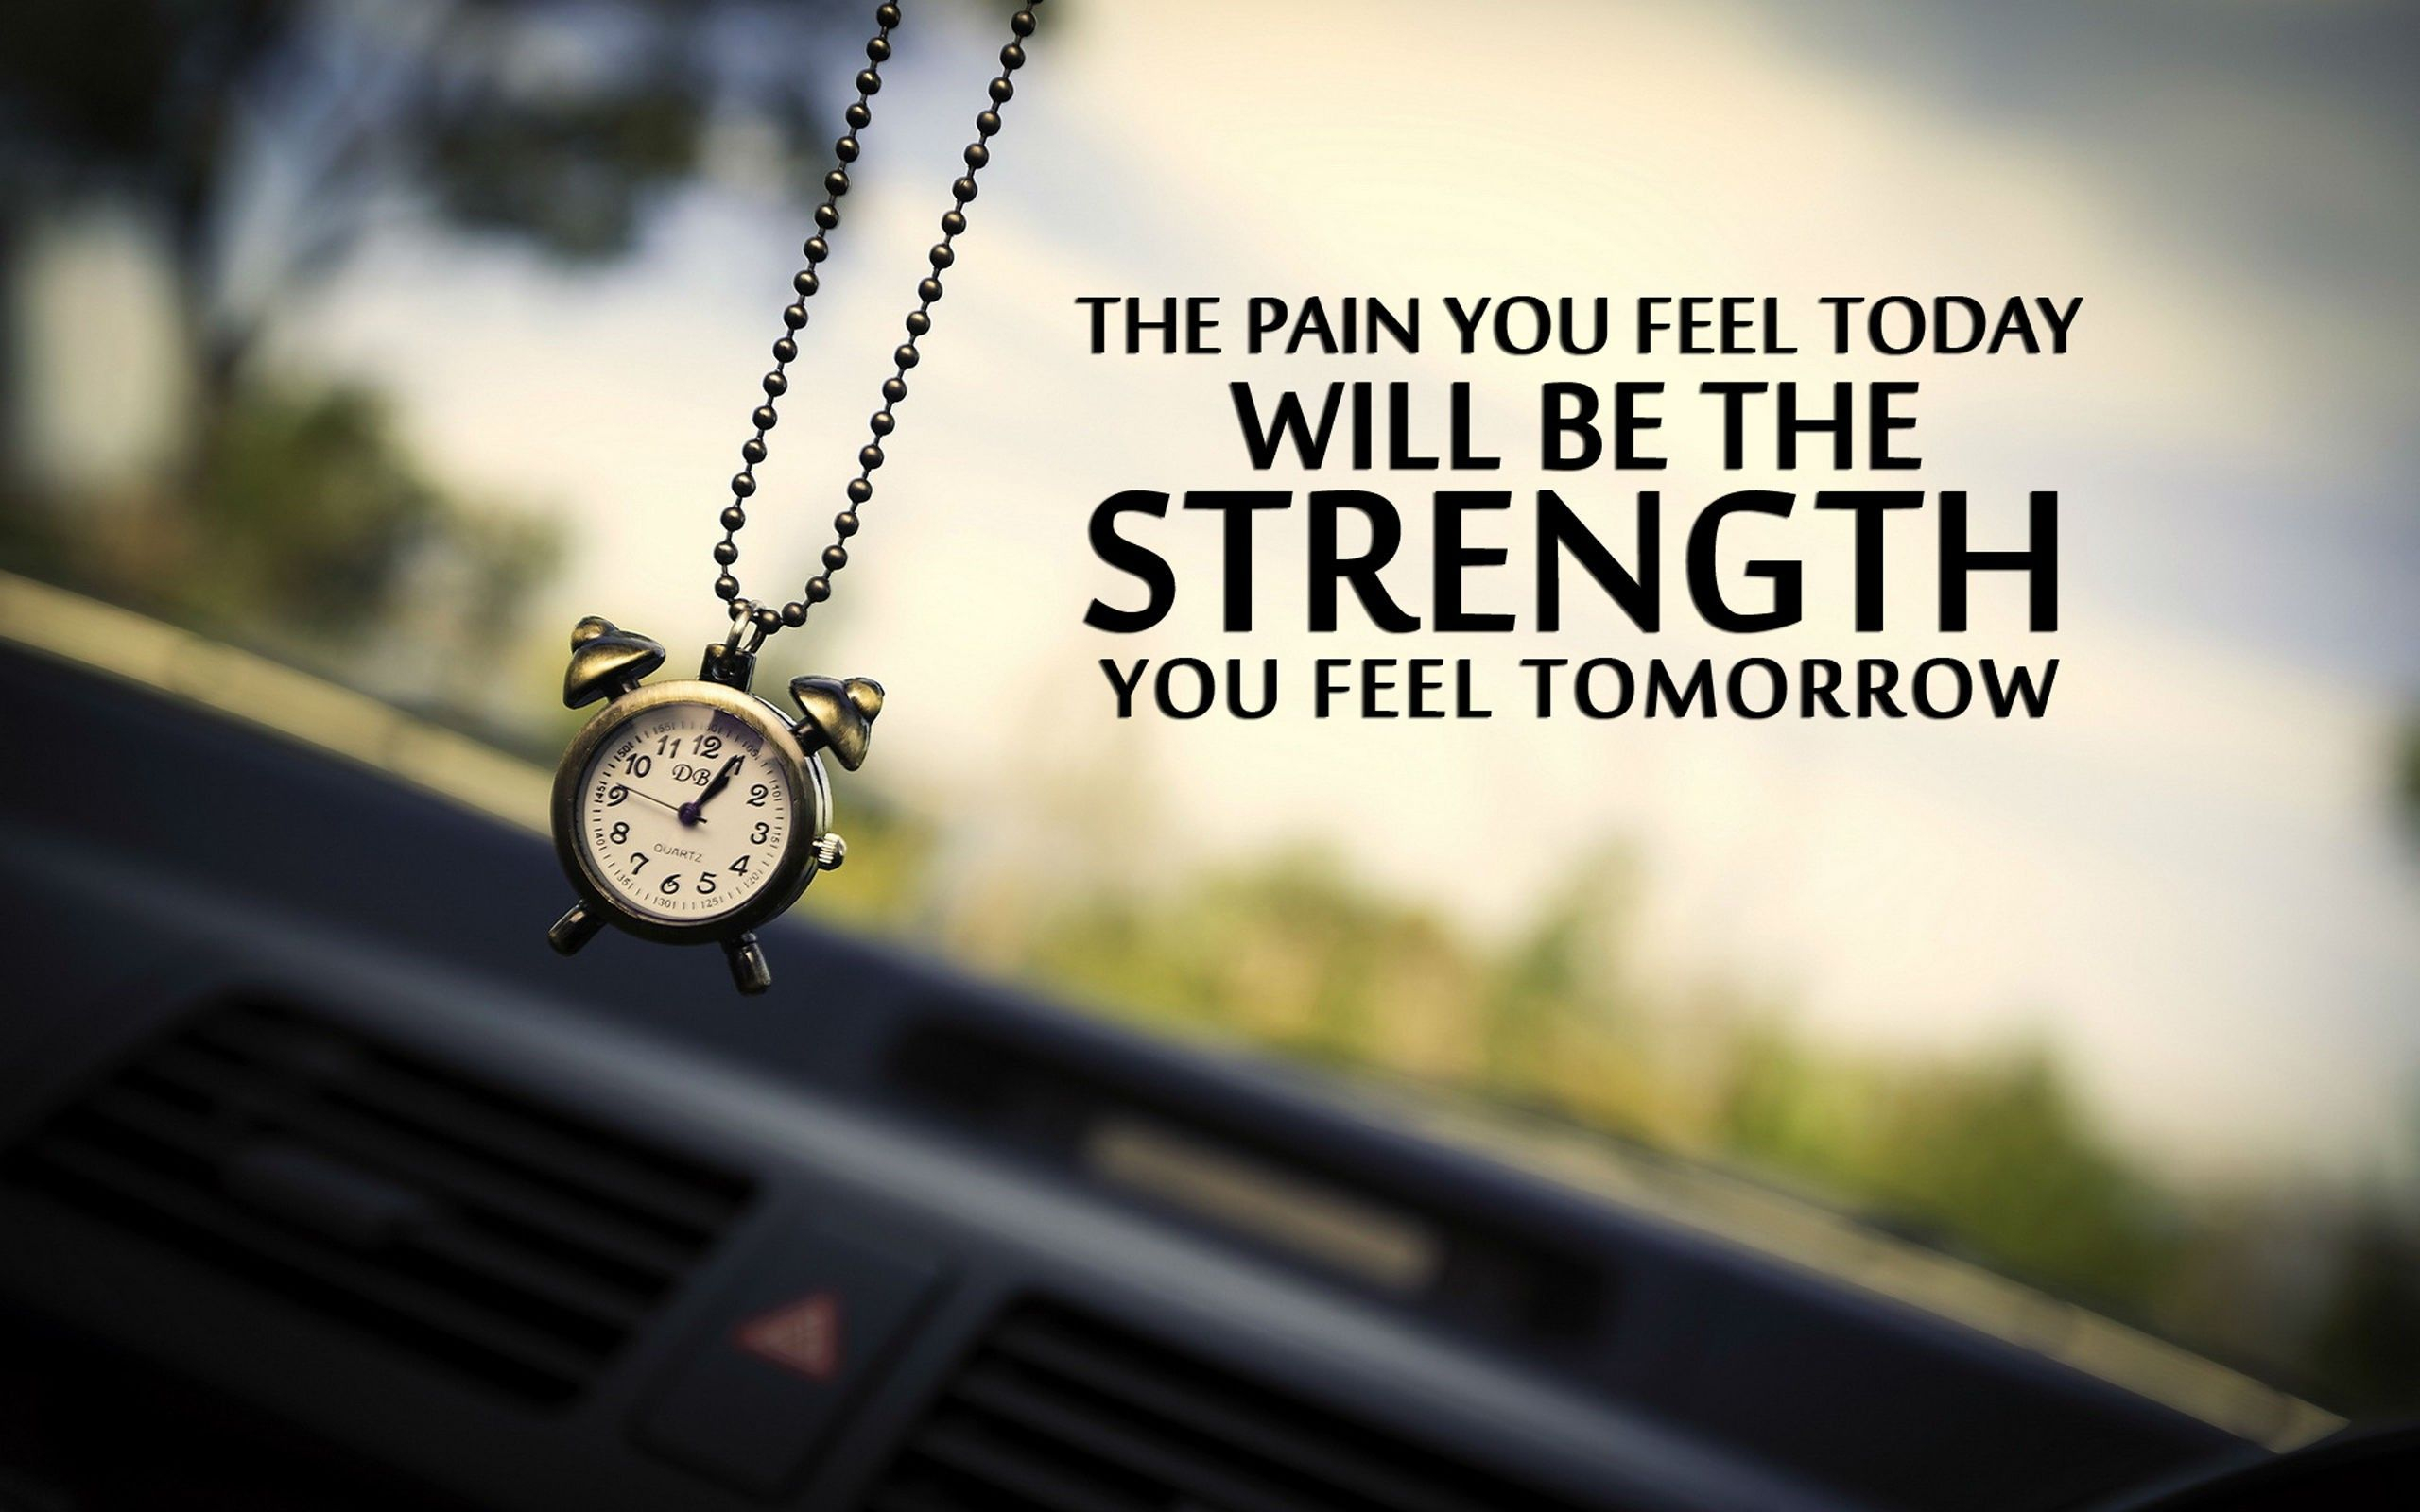 Motivational Quotes Hd Wallpapers - Motivational Quotes Hd Wallpapers For  Pc - 2560x1600 Wallpaper 